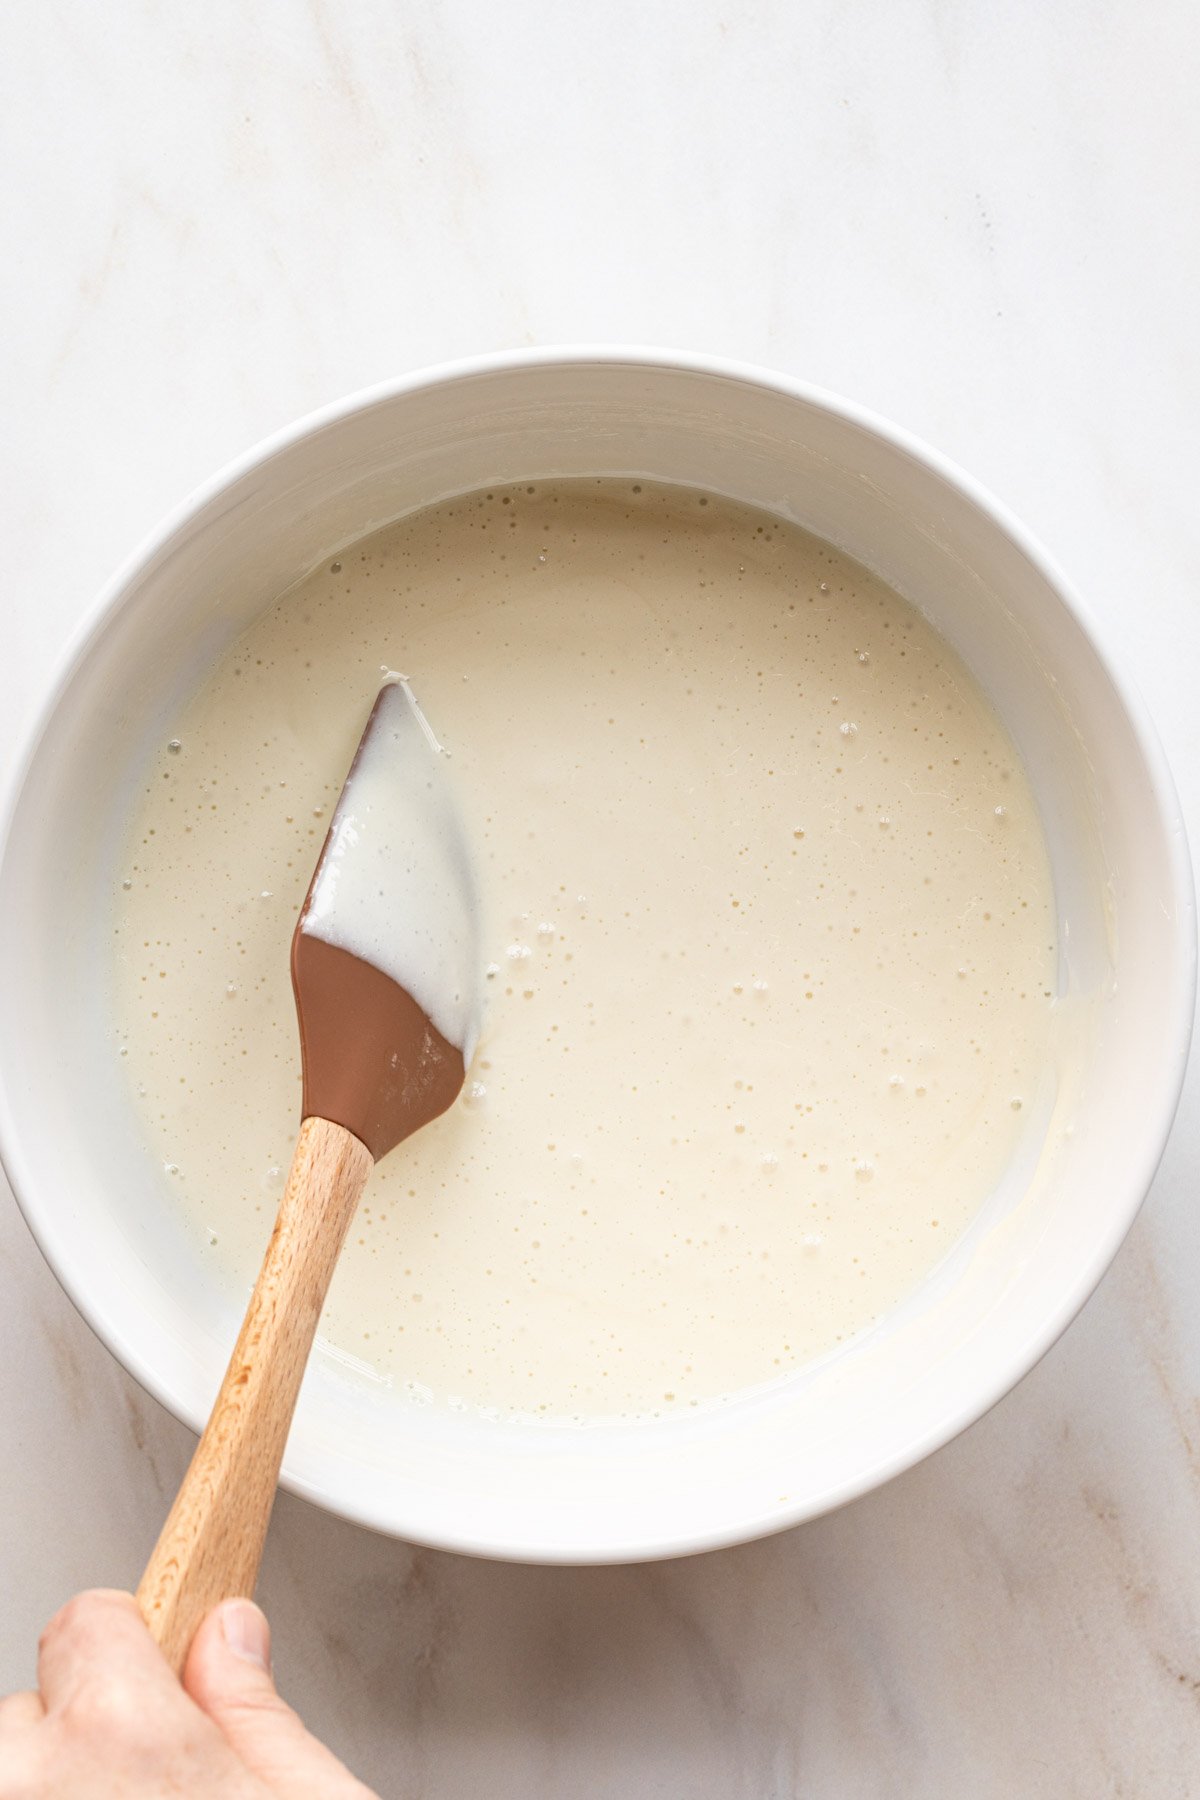 Sweetened condensed milk in a bowl with a spatula